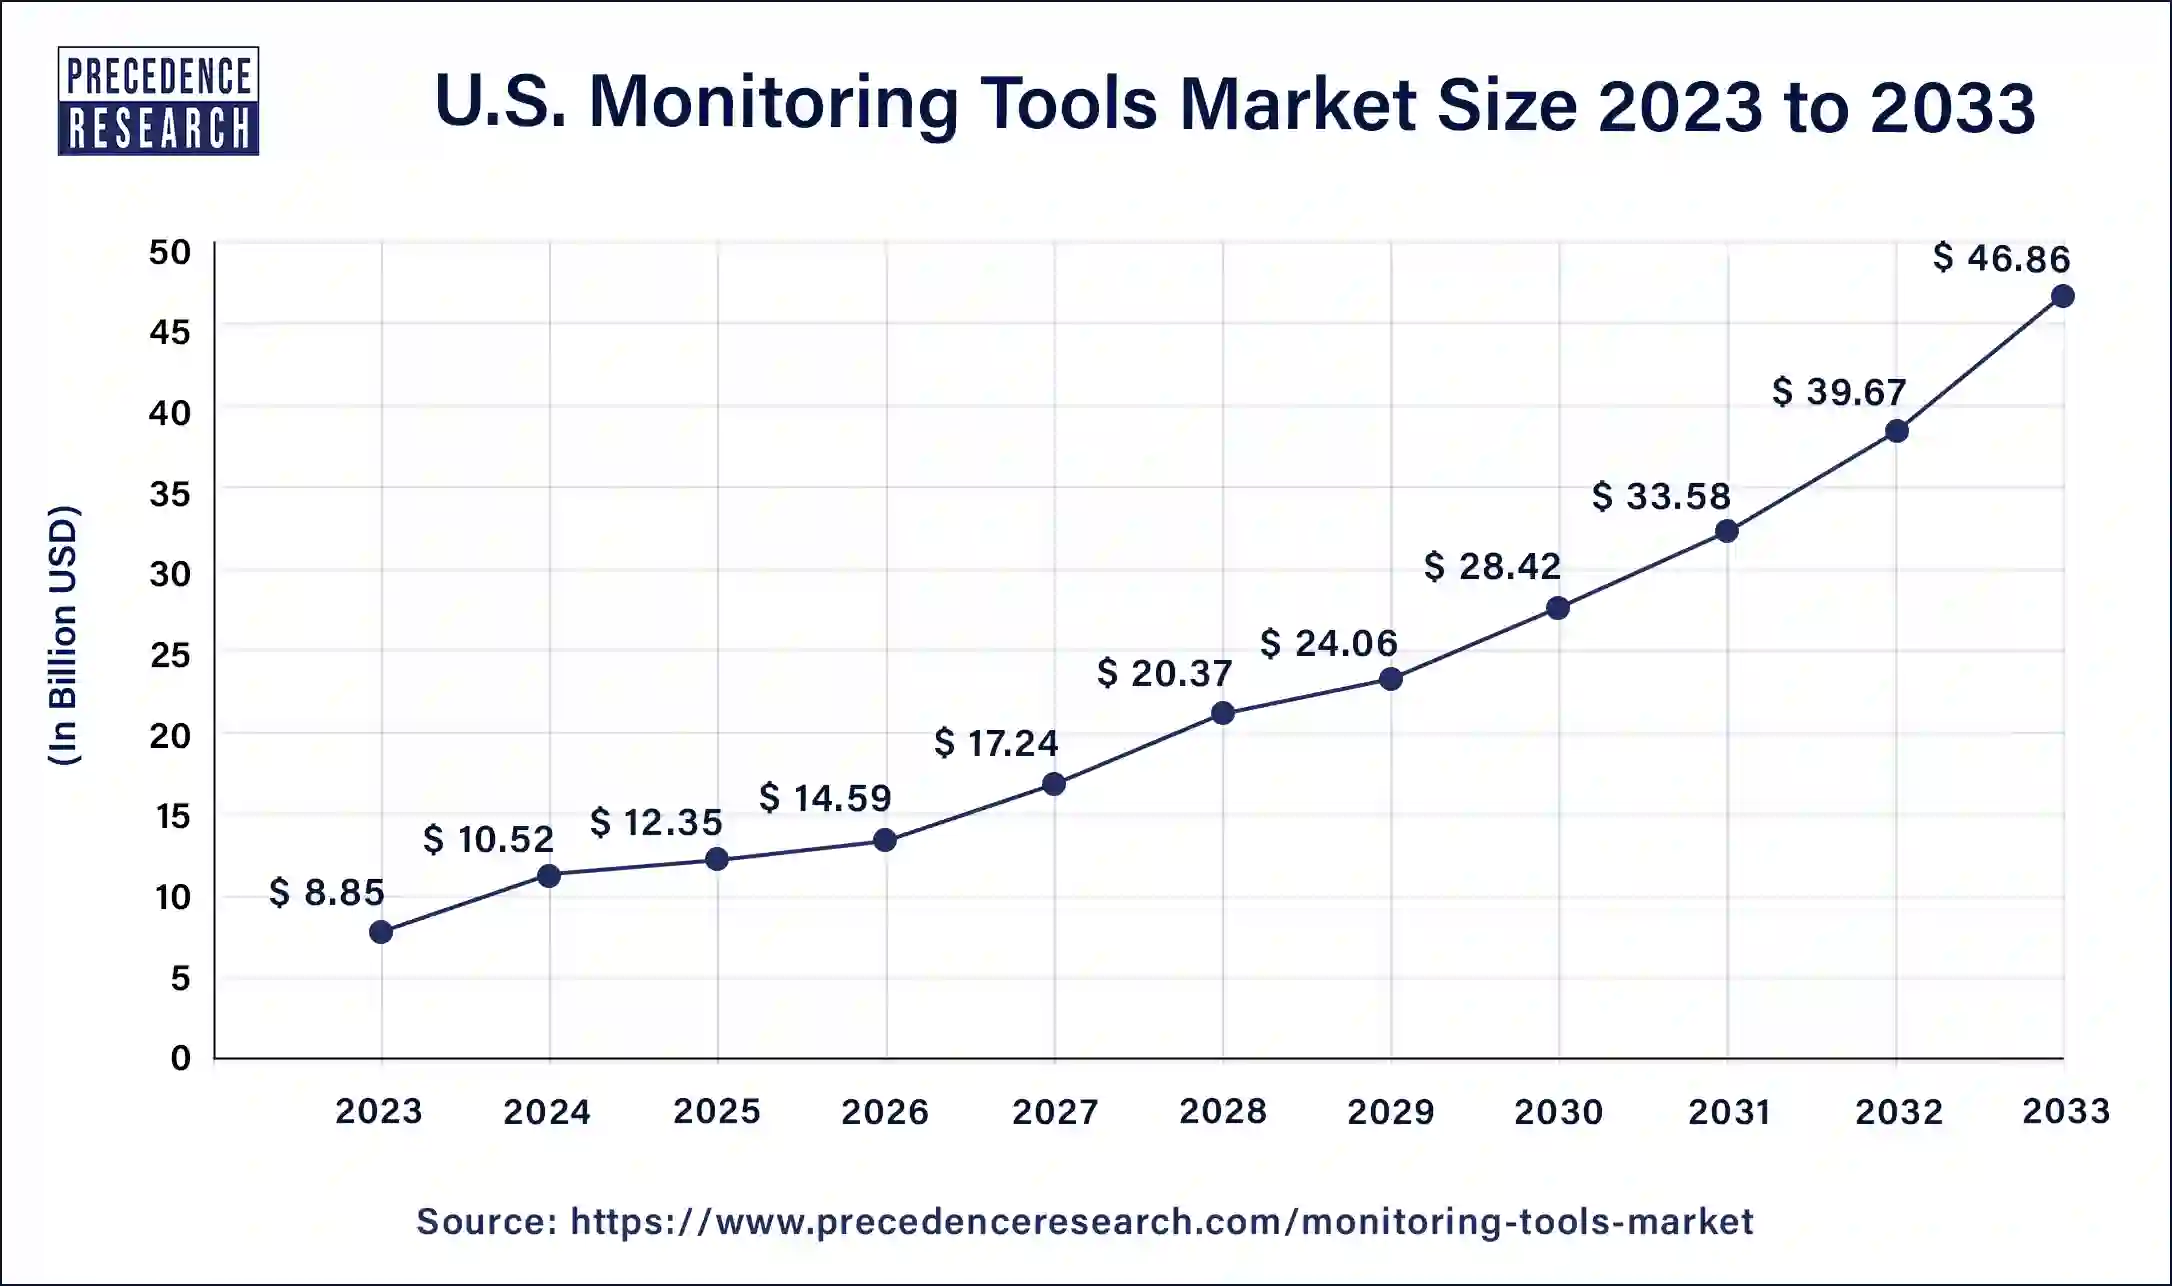 U.S. Monitoring Tools Market Size 2024 to 2033